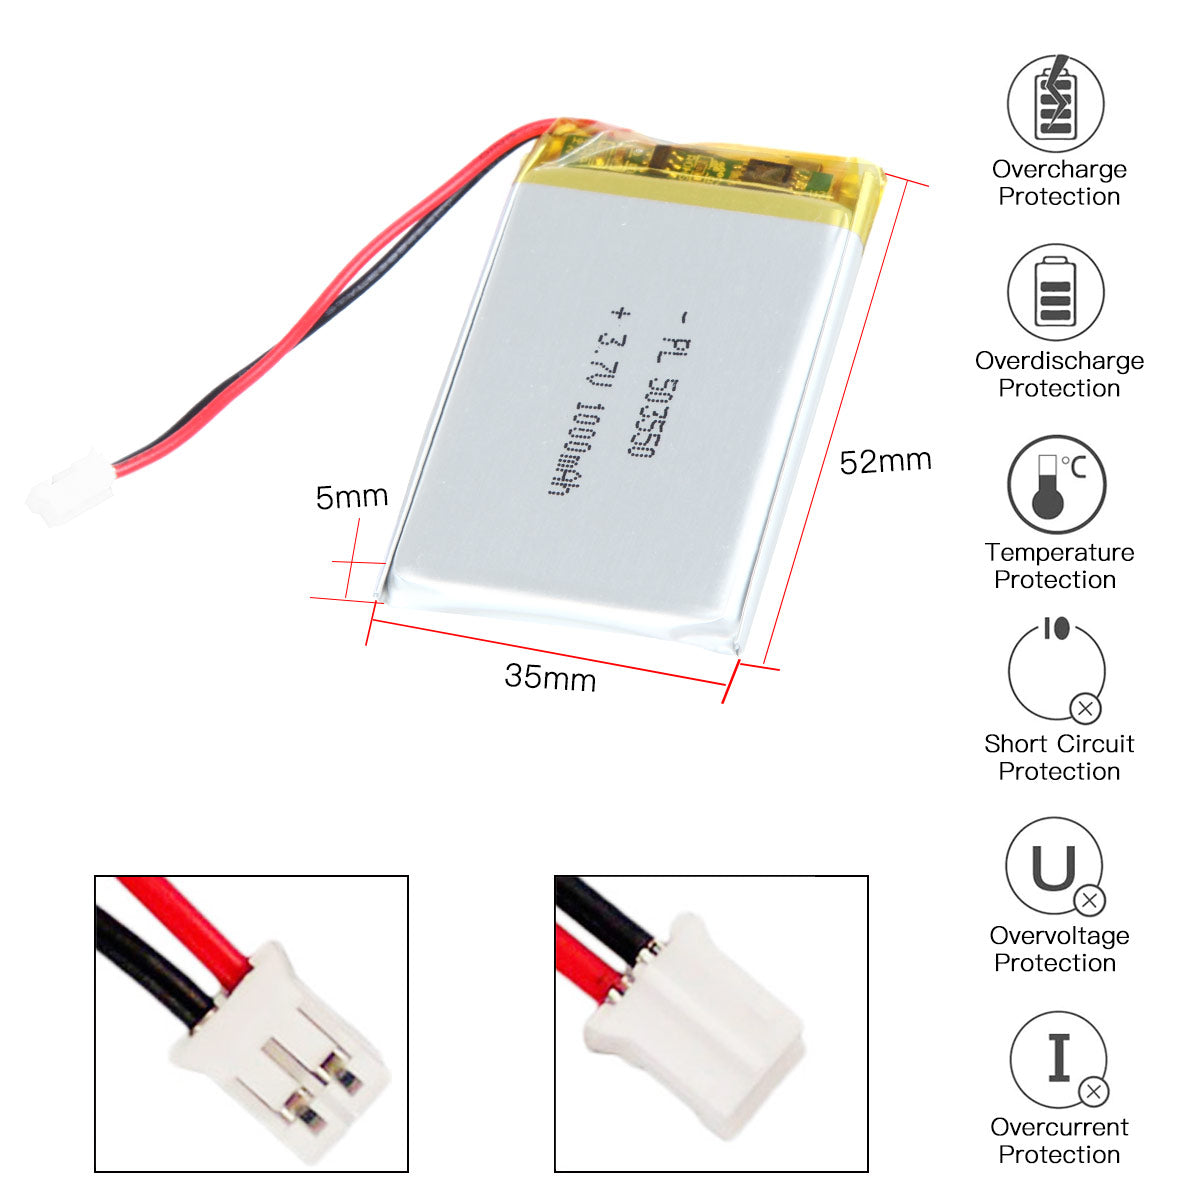 YDL 3.7V 1000mAh 503550 Rechargeable Lithium Polymer Battery Length 52mm